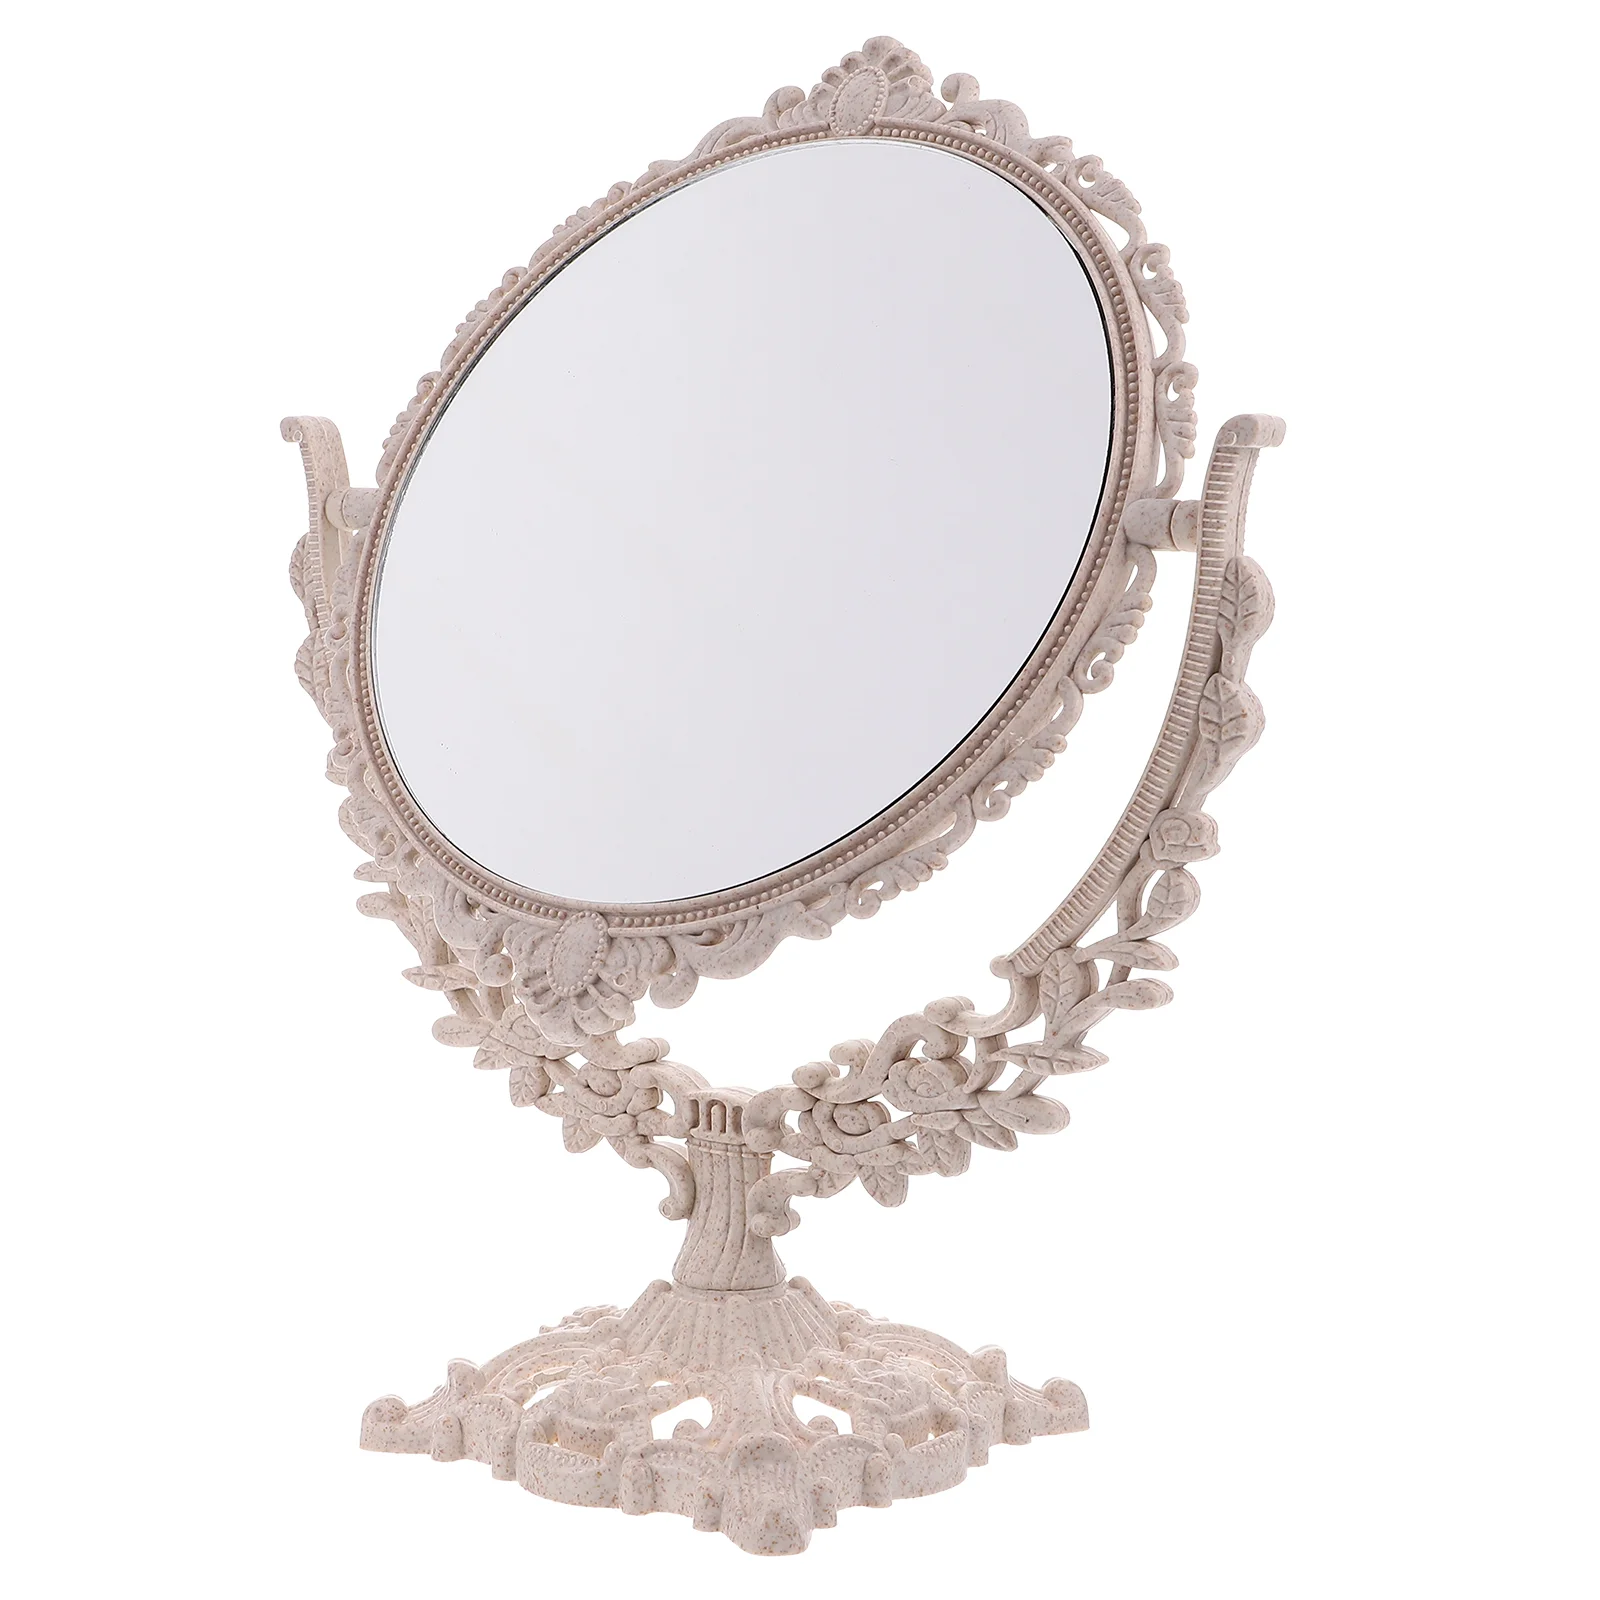 

Mirror Makeup Vintage Tabletop Vanity Table Retro Desktop Oval Cosmtic Mirrors Double Sided Rotatable Decorative Dressing Round